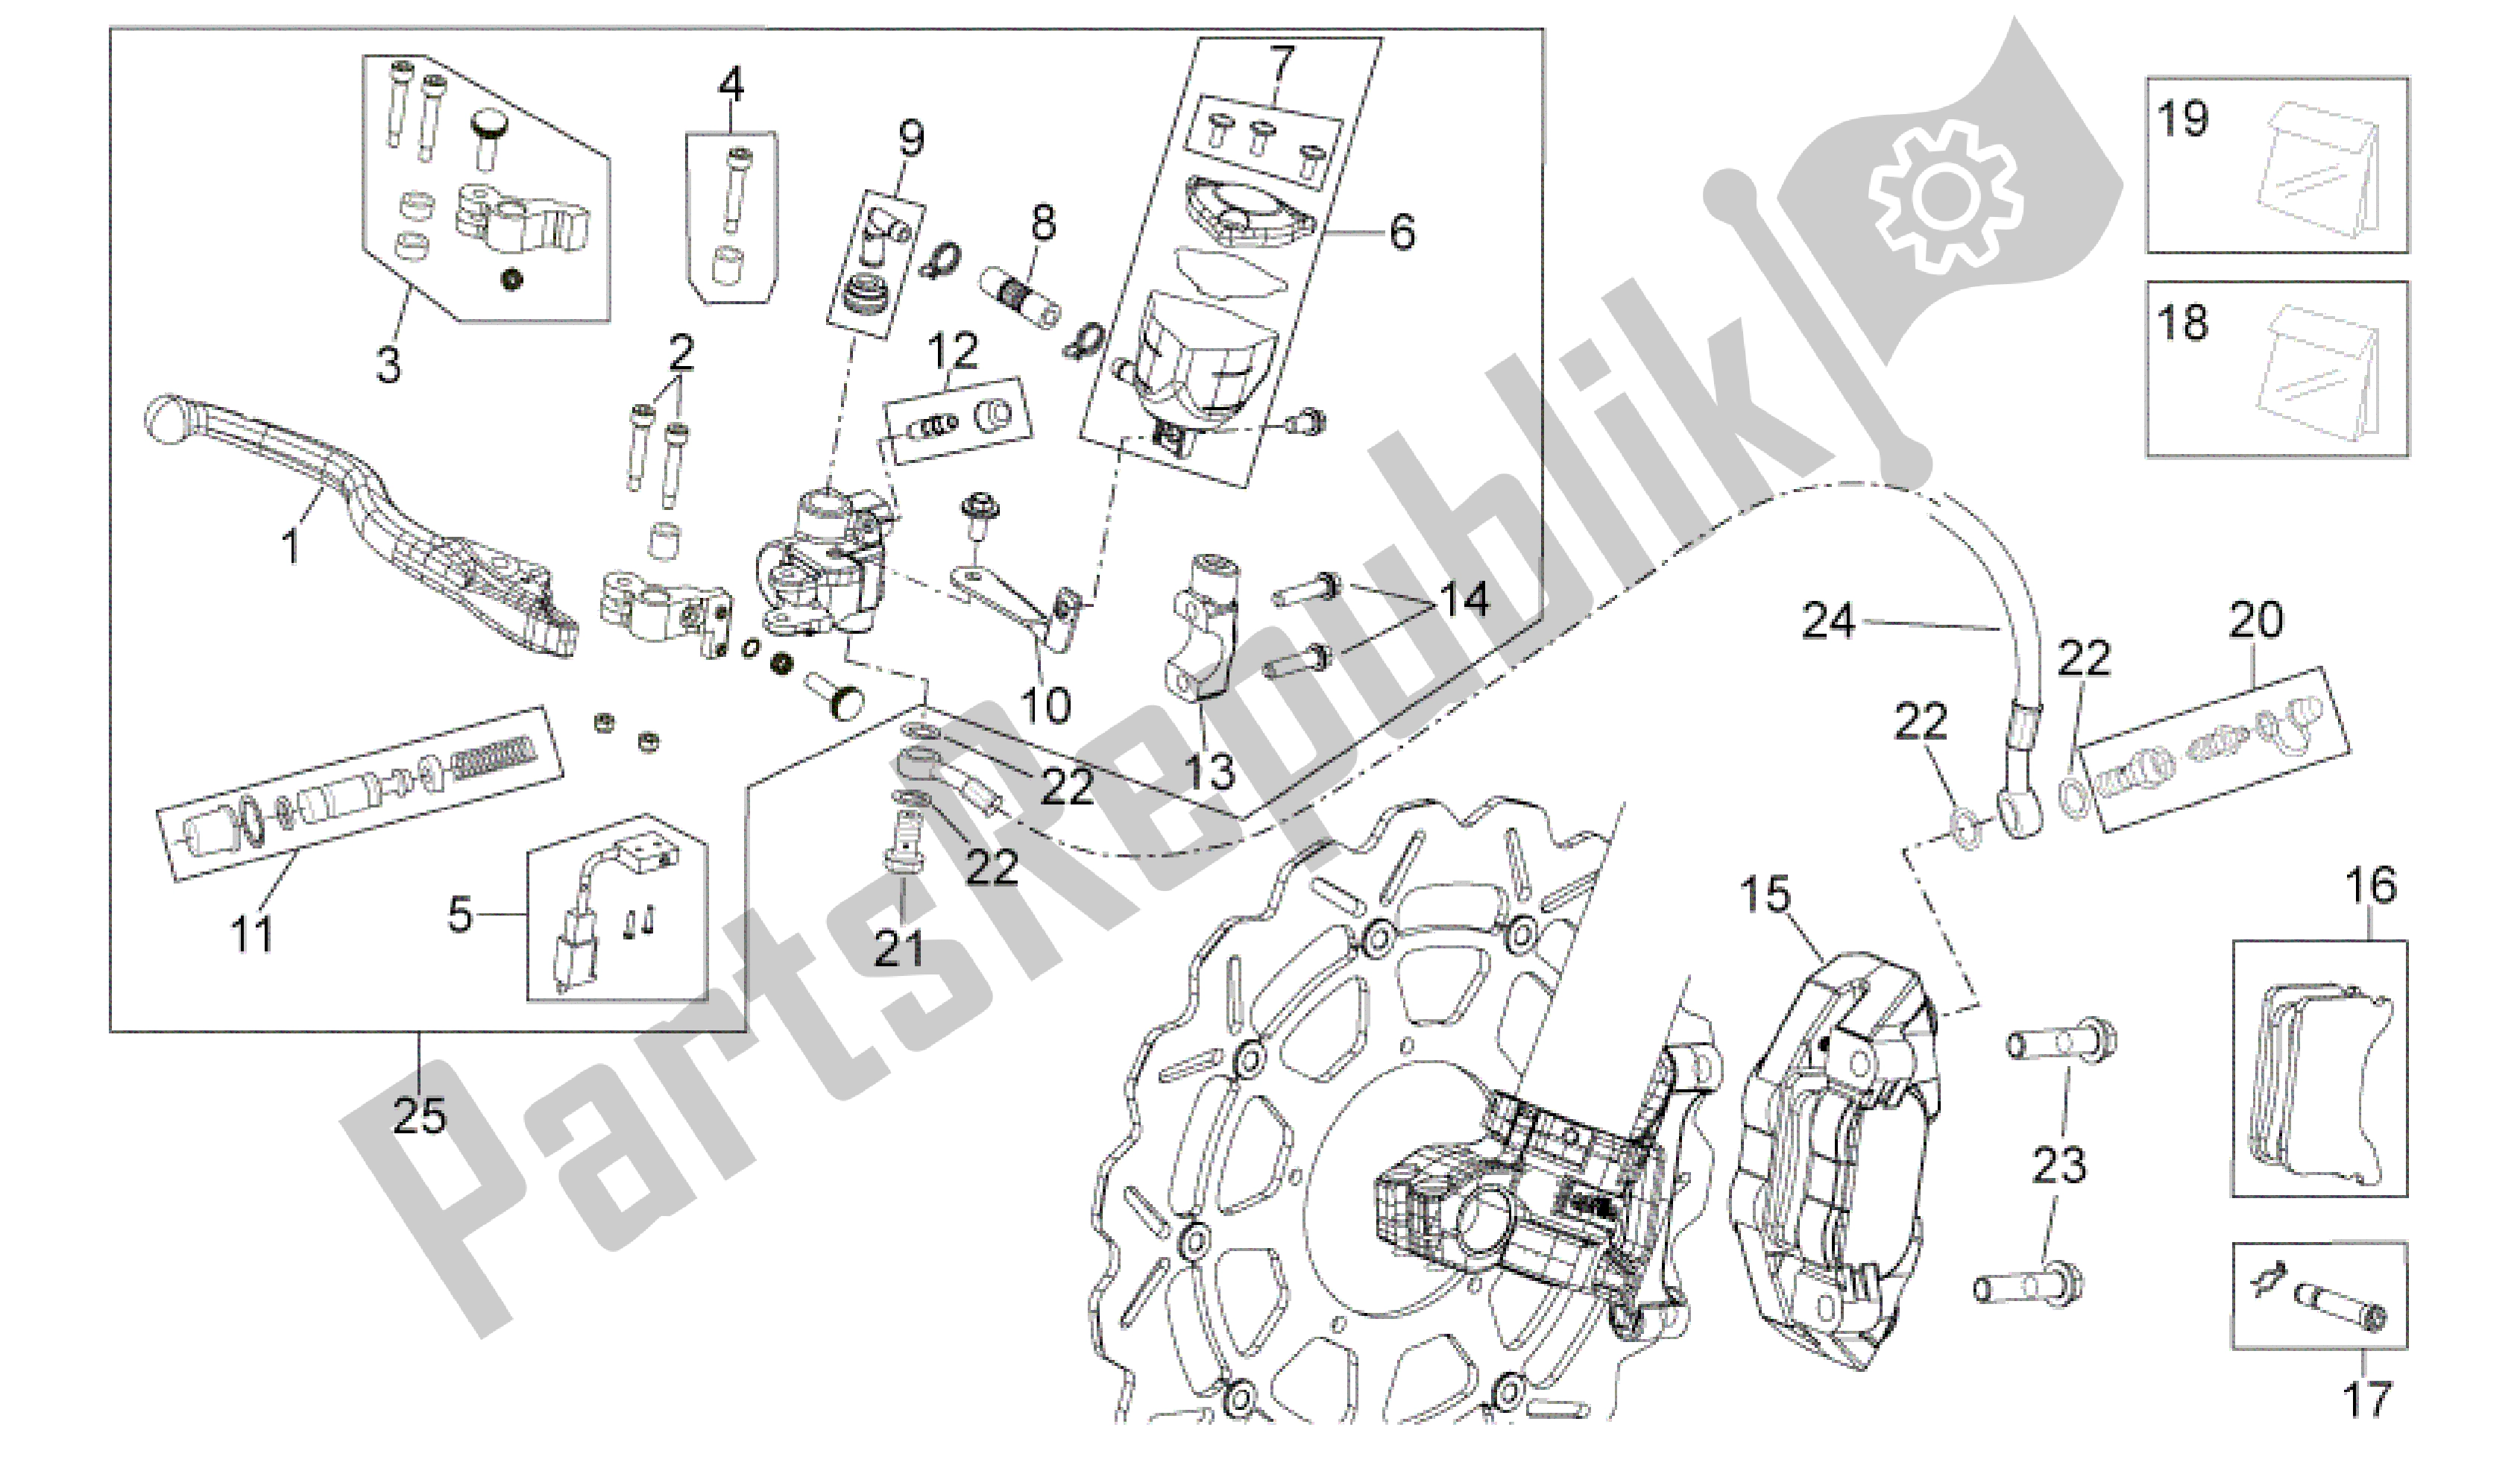 All parts for the Front Brake System of the Aprilia SXV 550 2009 - 2011